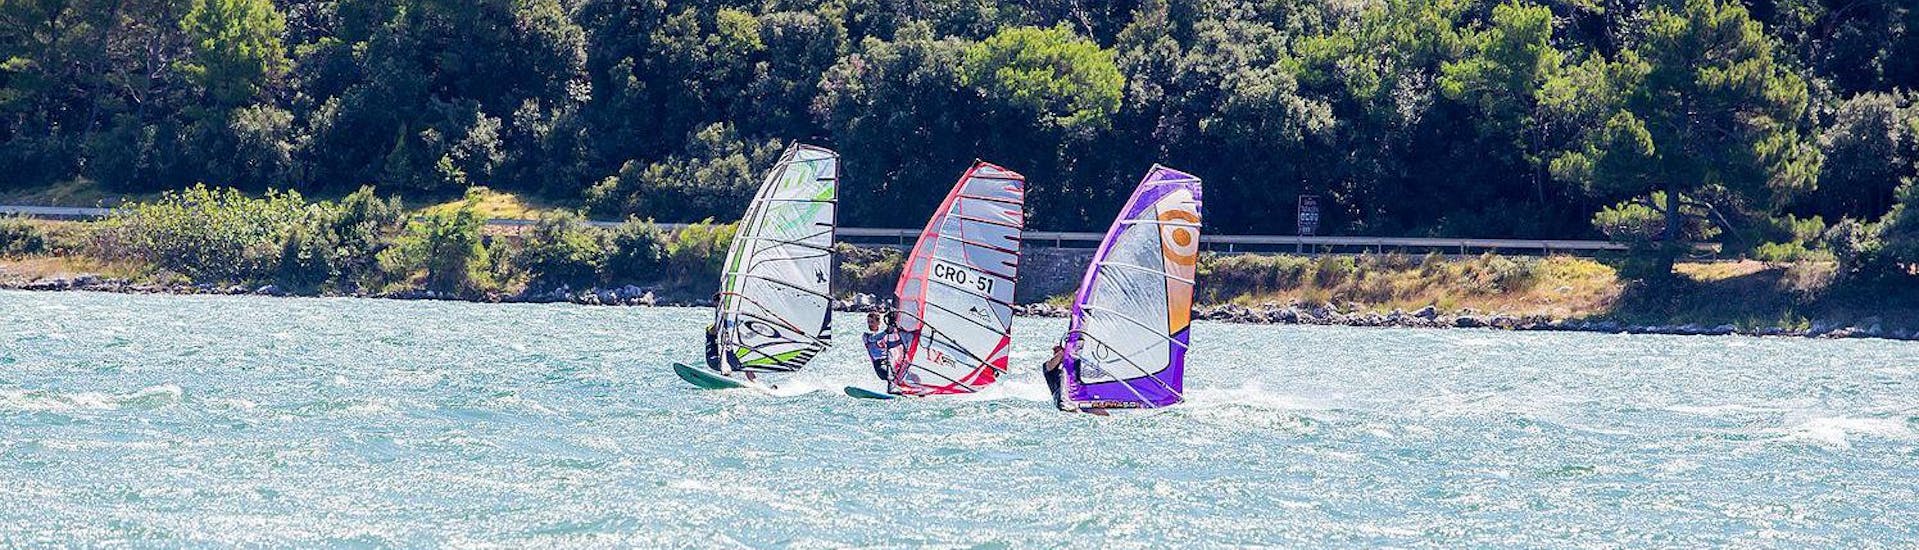 Basic Windsurfing Lessons (from 9 y.) in Pomer.